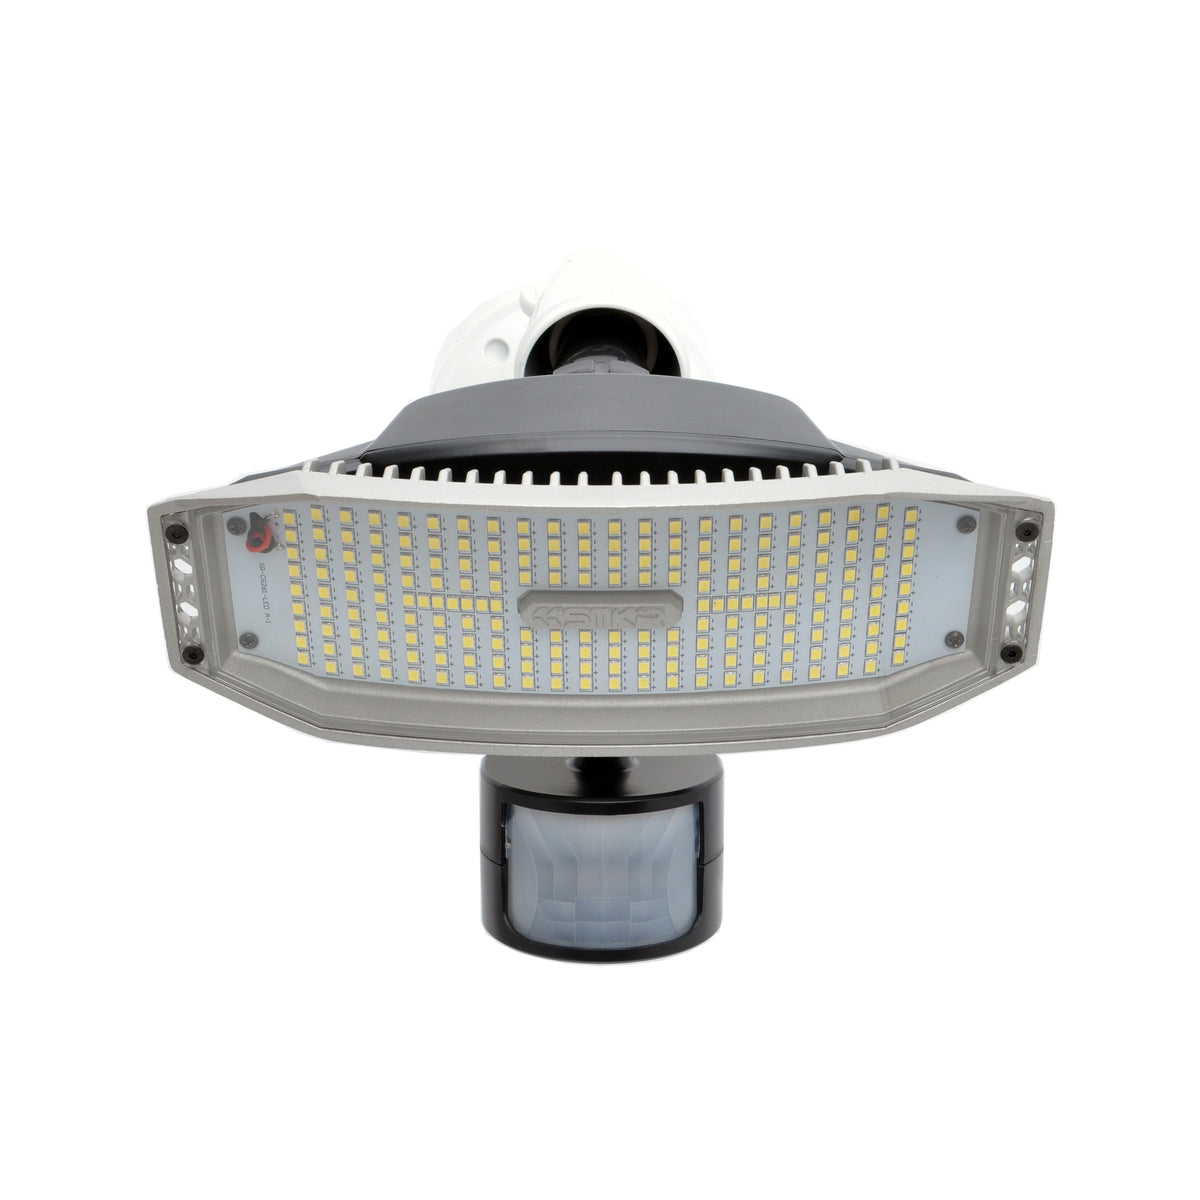 Lave Auto Pro - Lampes frontales